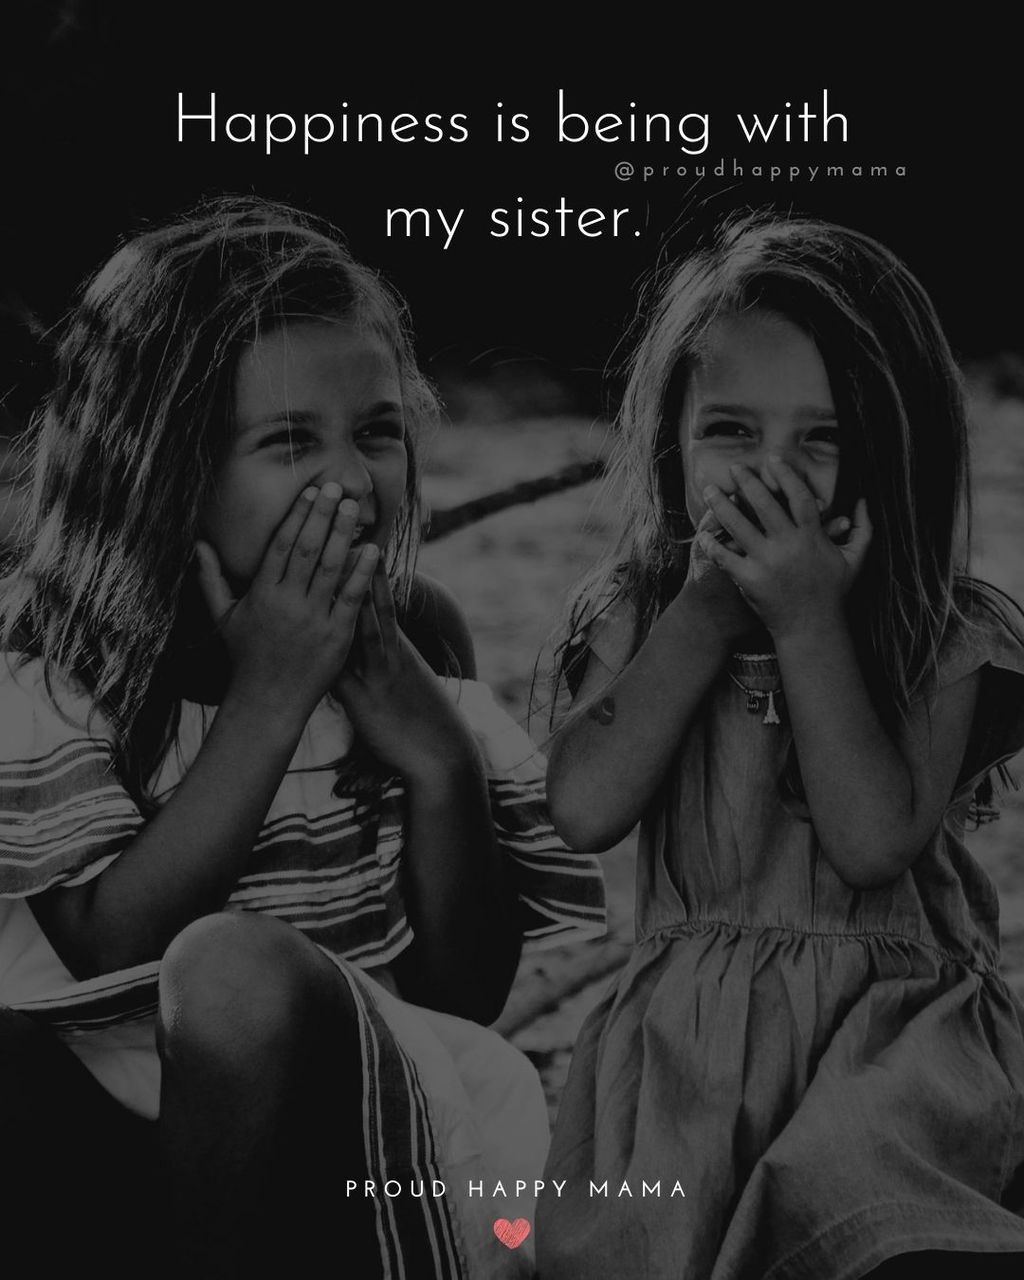 Sibling Quotes - Happiness is being with my sister.